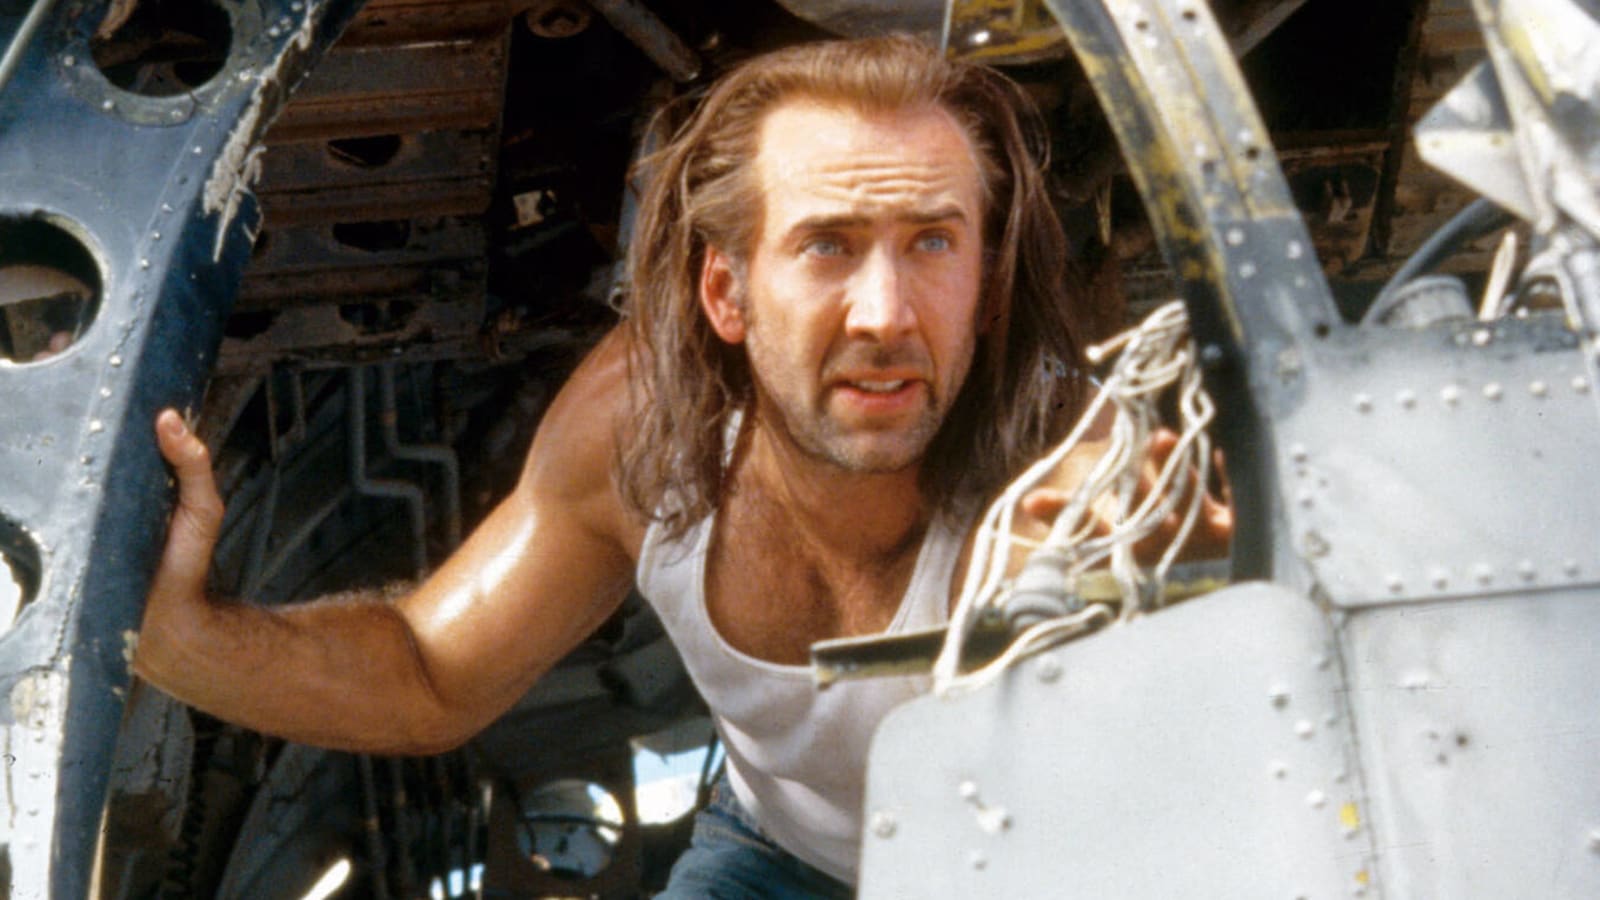 20 facts you might not know about 'Con Air'